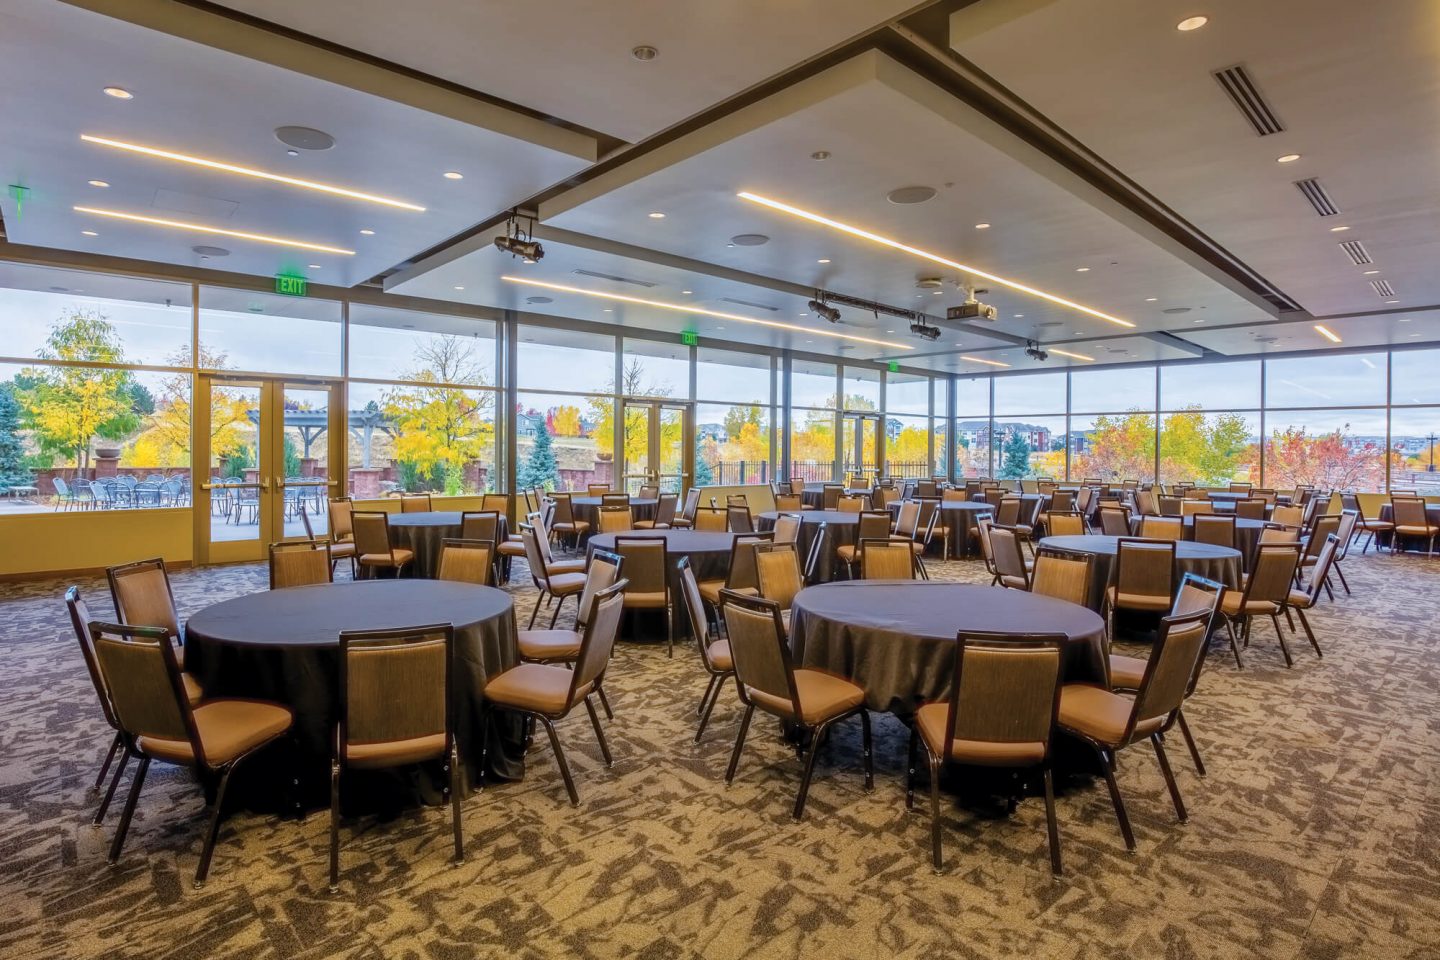 Event Room at the PACE Center in Parker, CO.